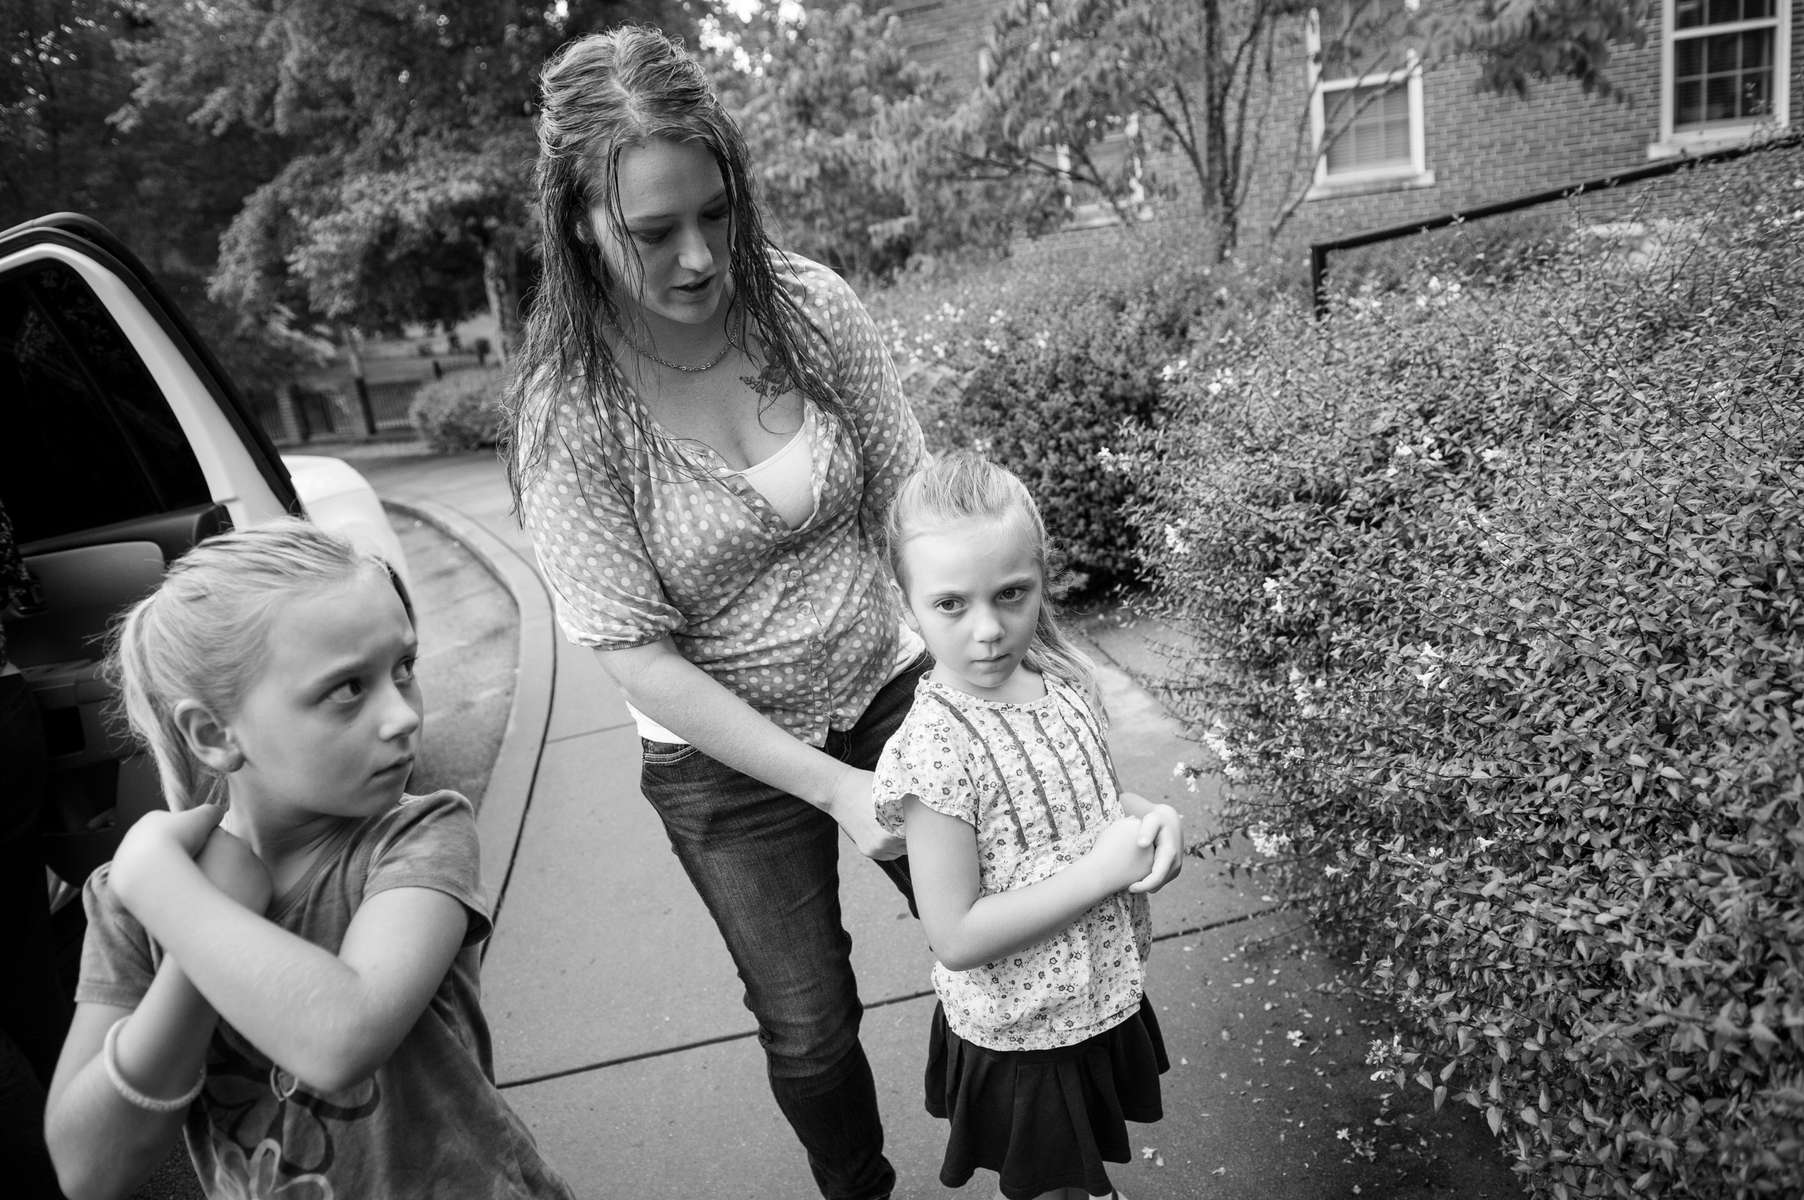 Katrina Gilbert, with daughters Brooklynn, 7-years-old, and Lydia, 5-years-old, arrive at the Chambliss Center for Children to pick up son Trent, 3-years-old on August 21, 2013 in Chattanooga, TN.